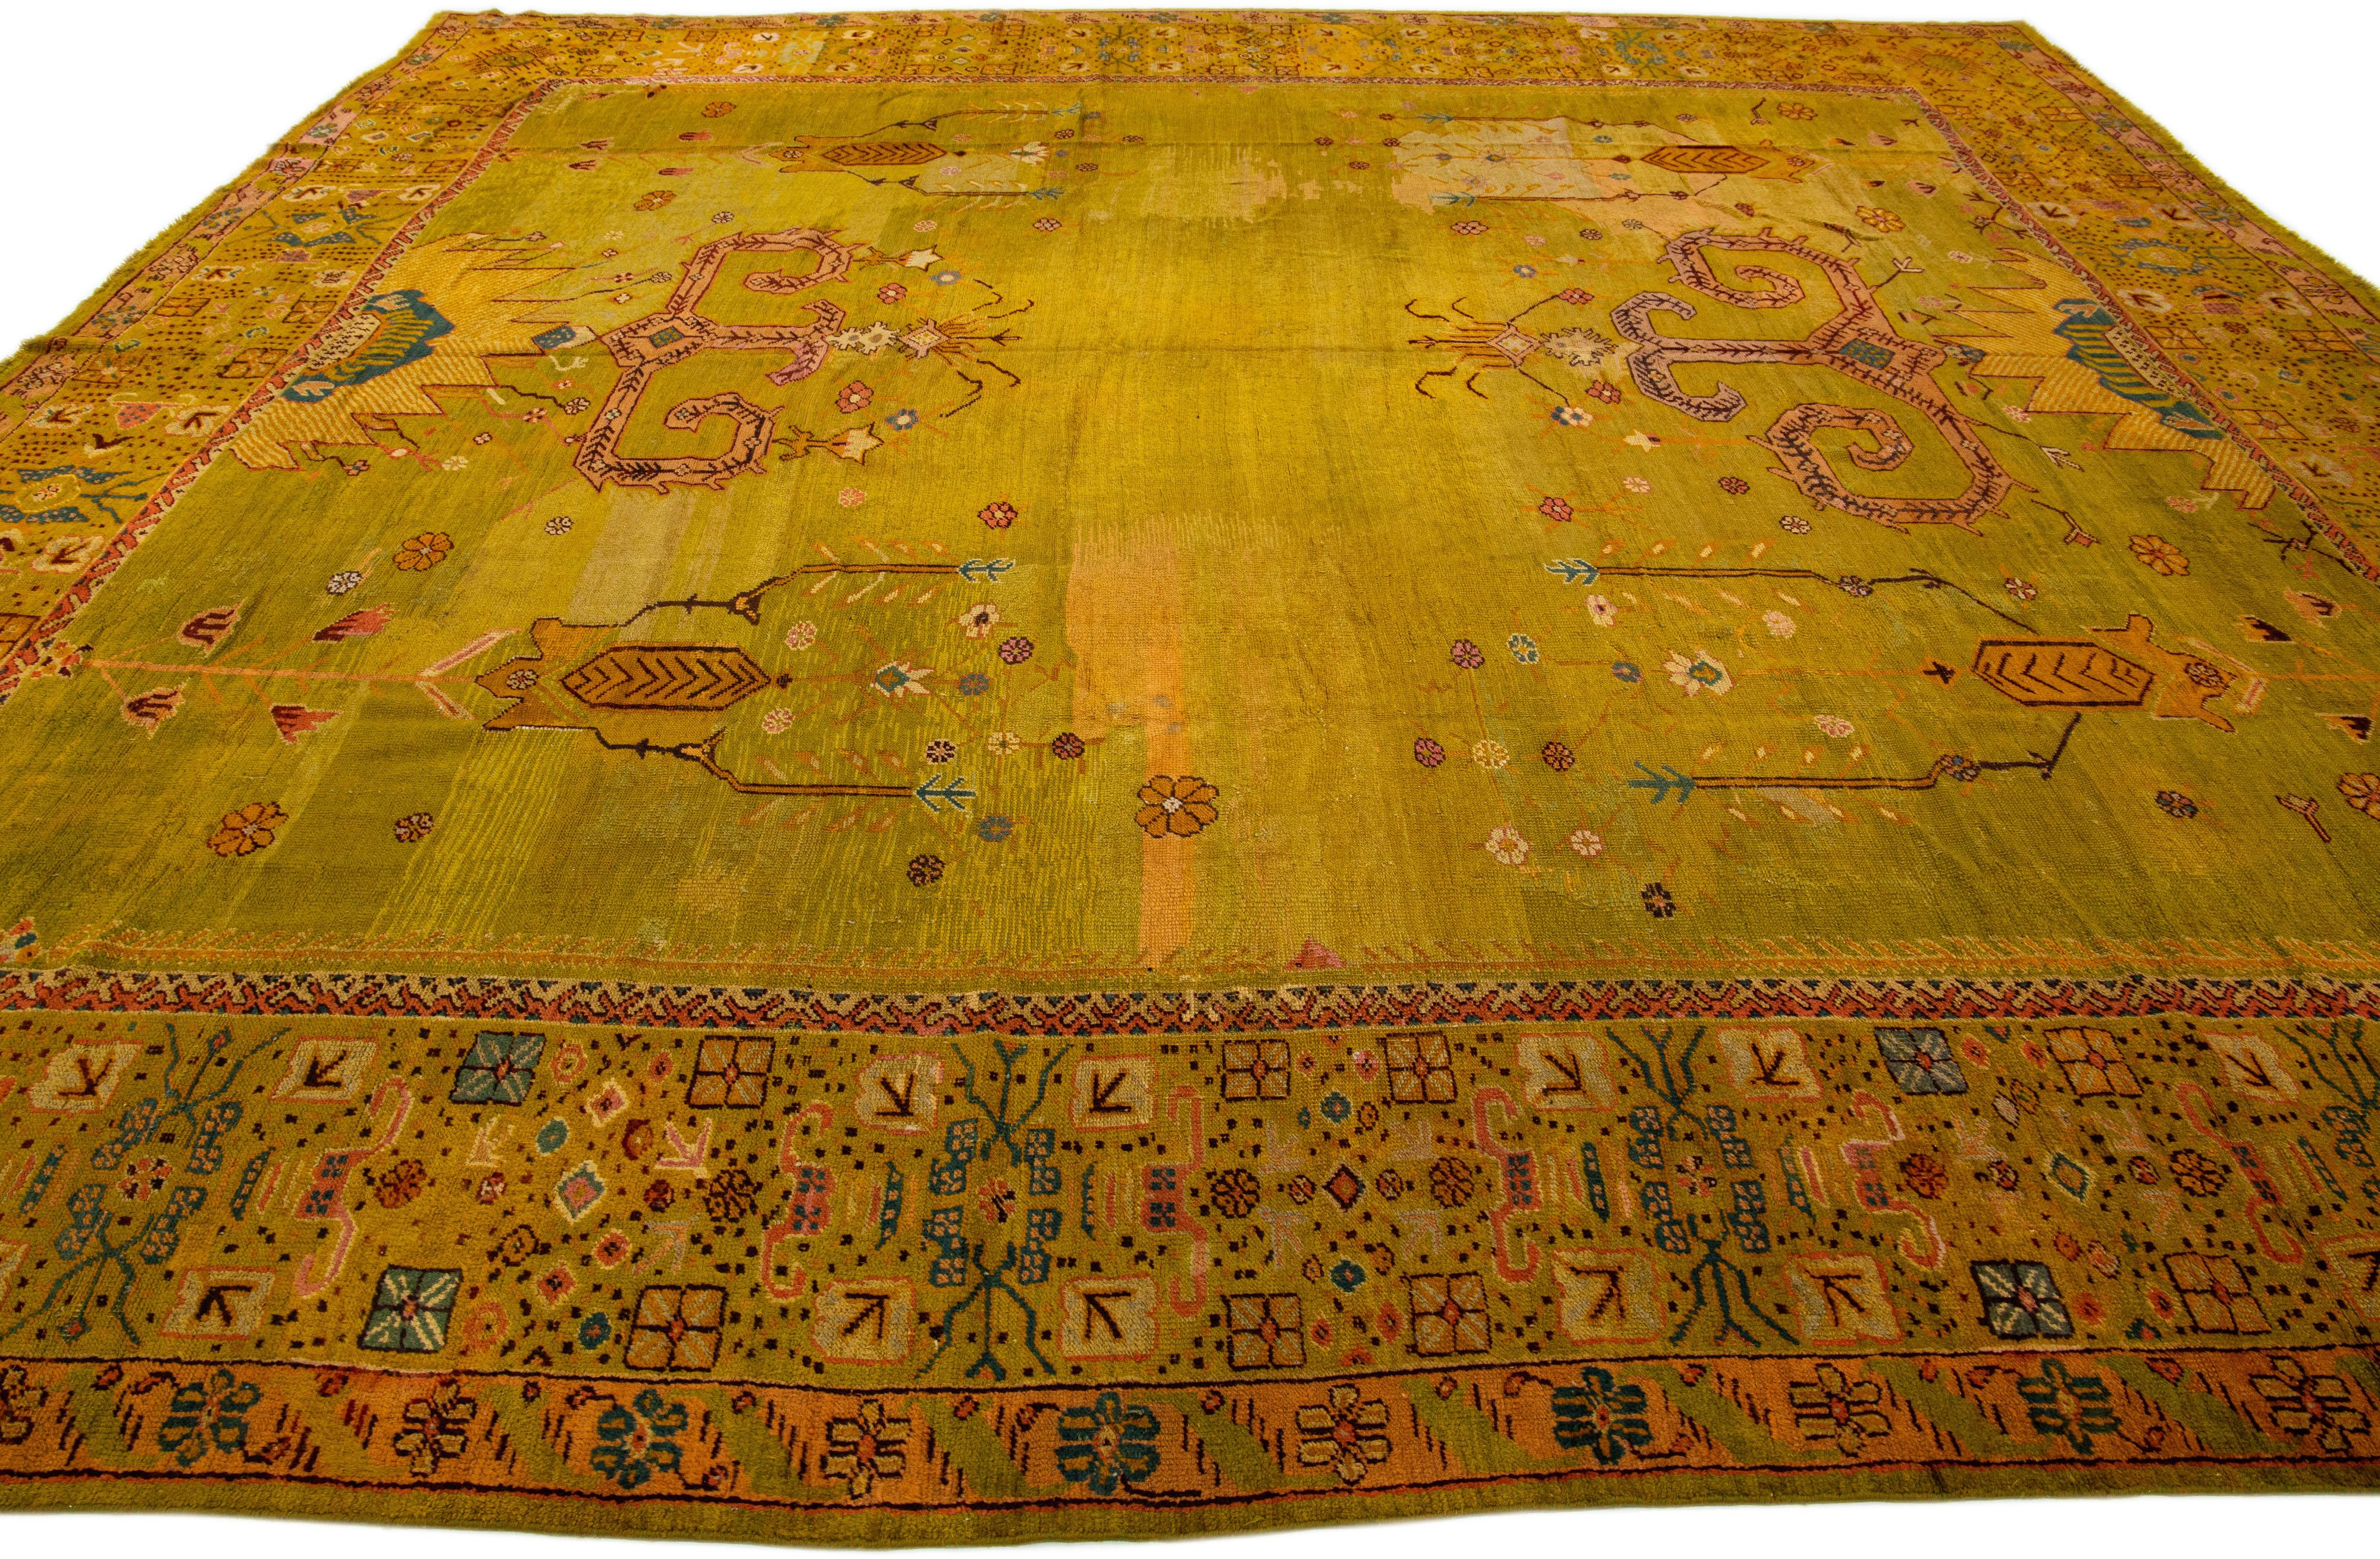 Oversize Designed 19th Century Turkish Oushak Wool Rug with Olive Yellow Field In Excellent Condition For Sale In Norwalk, CT